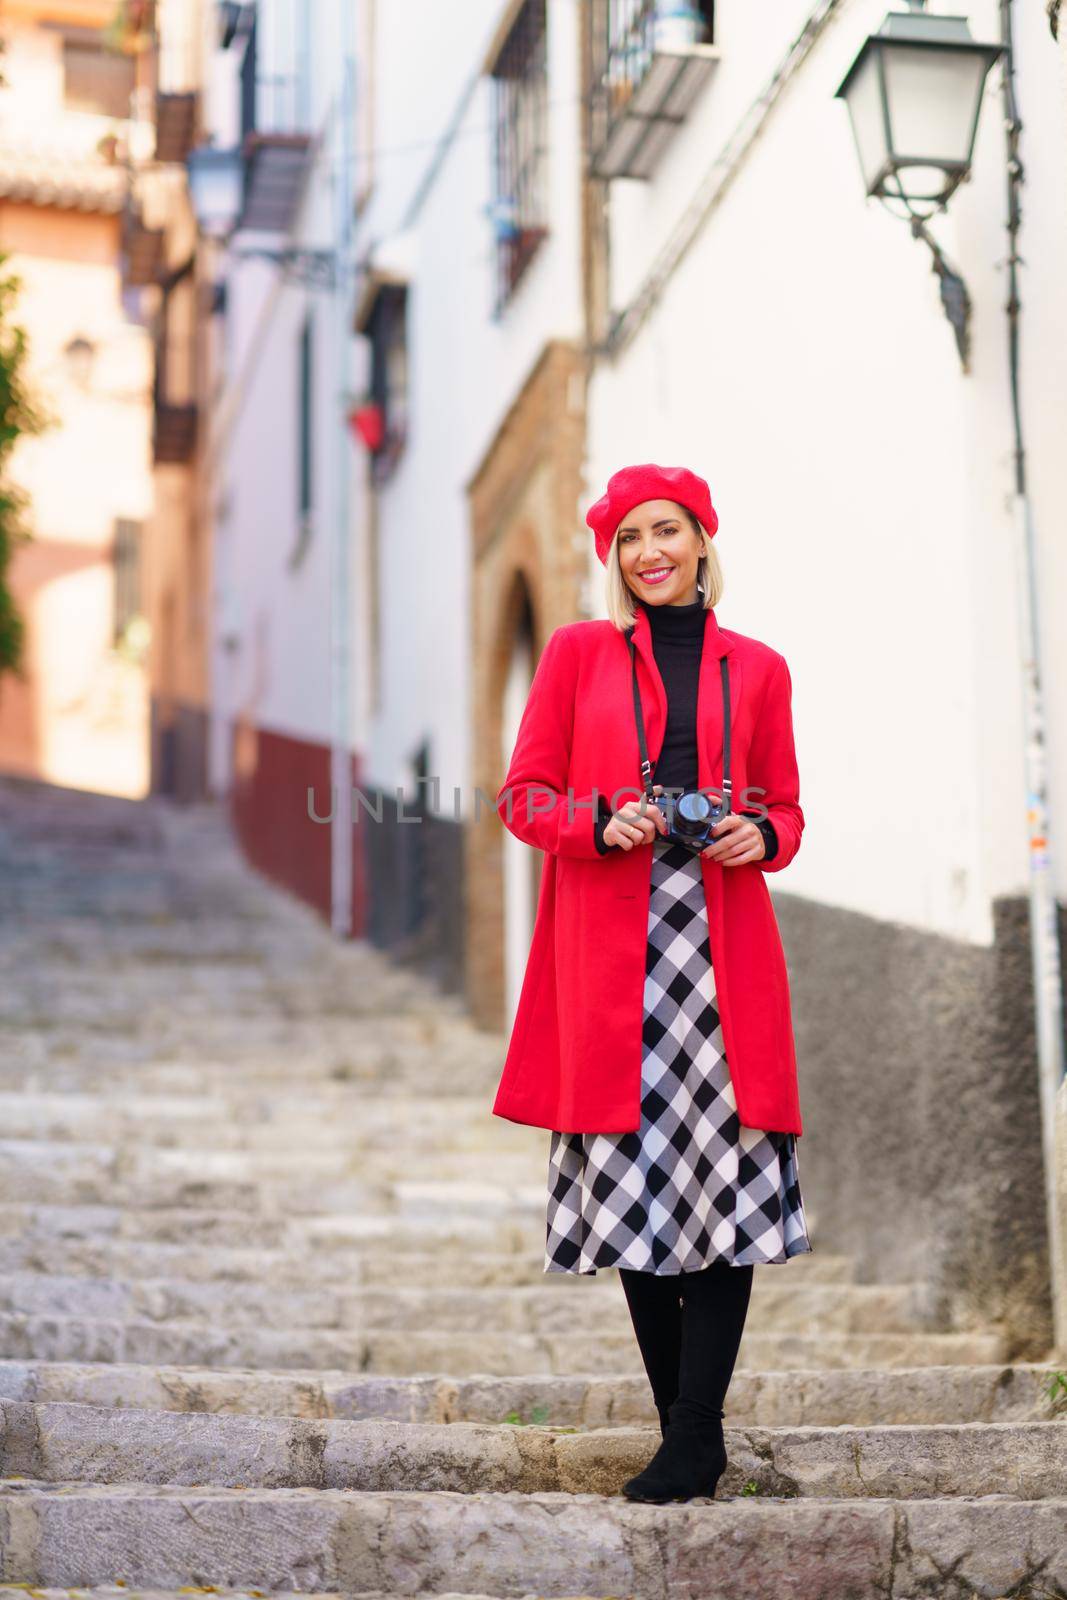 Full body of delighted young female traveler in elegant red coat, checkered skirt and beret smiling and looking at camera while standing on stairs in old town